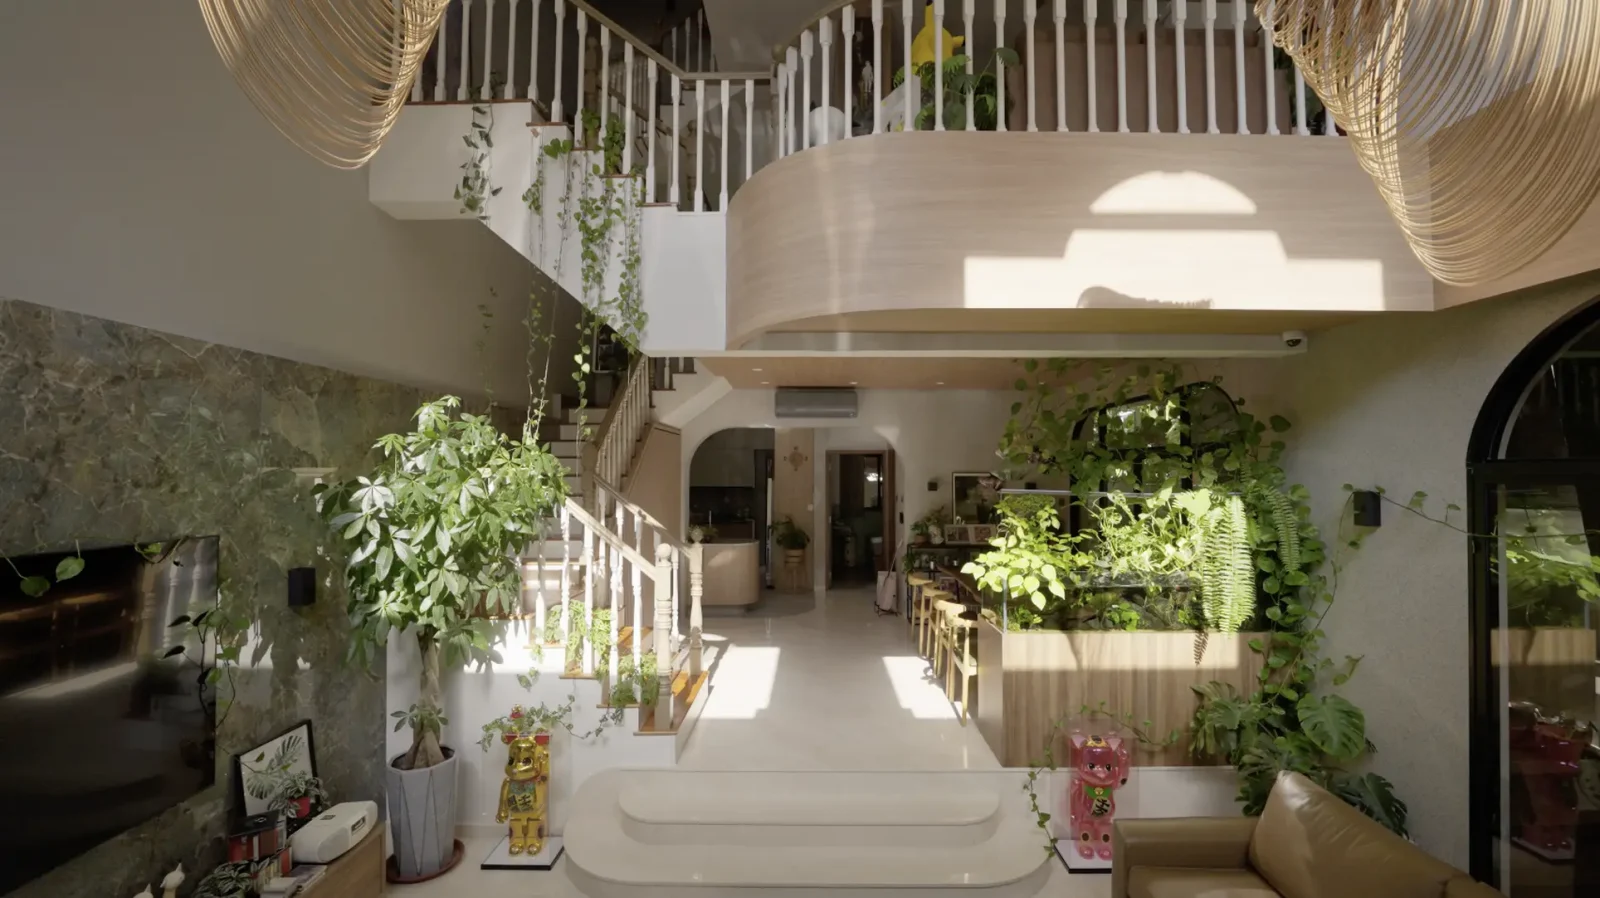 A Designers Journey To A Secret Garden Home For His Family 1